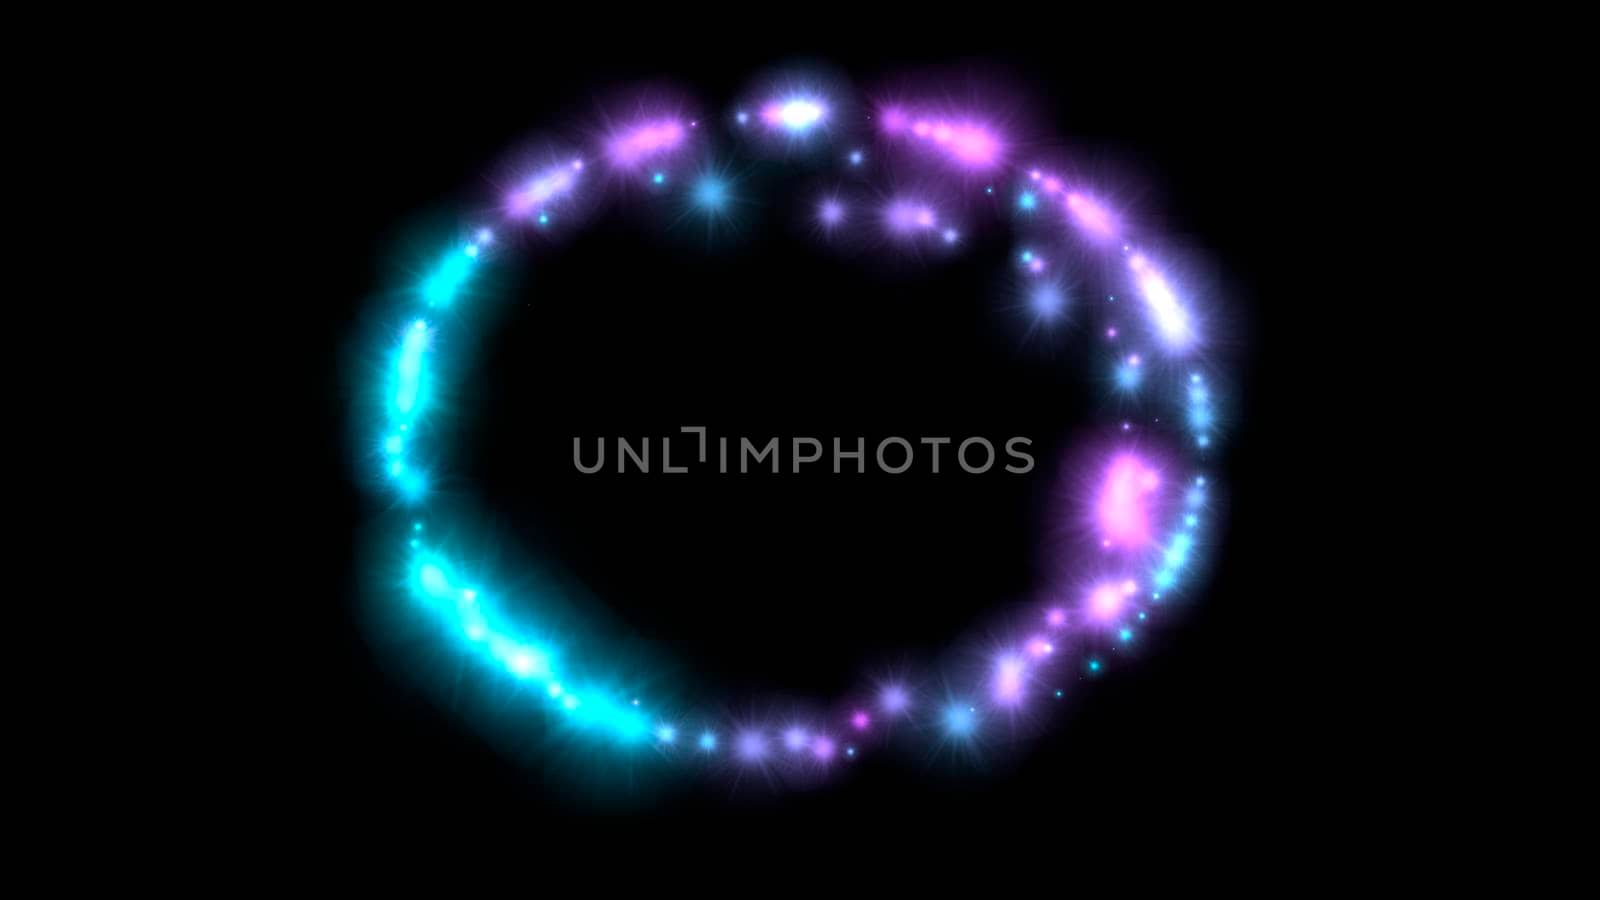 Abstract black background with glowing stars and particles by Vvicca